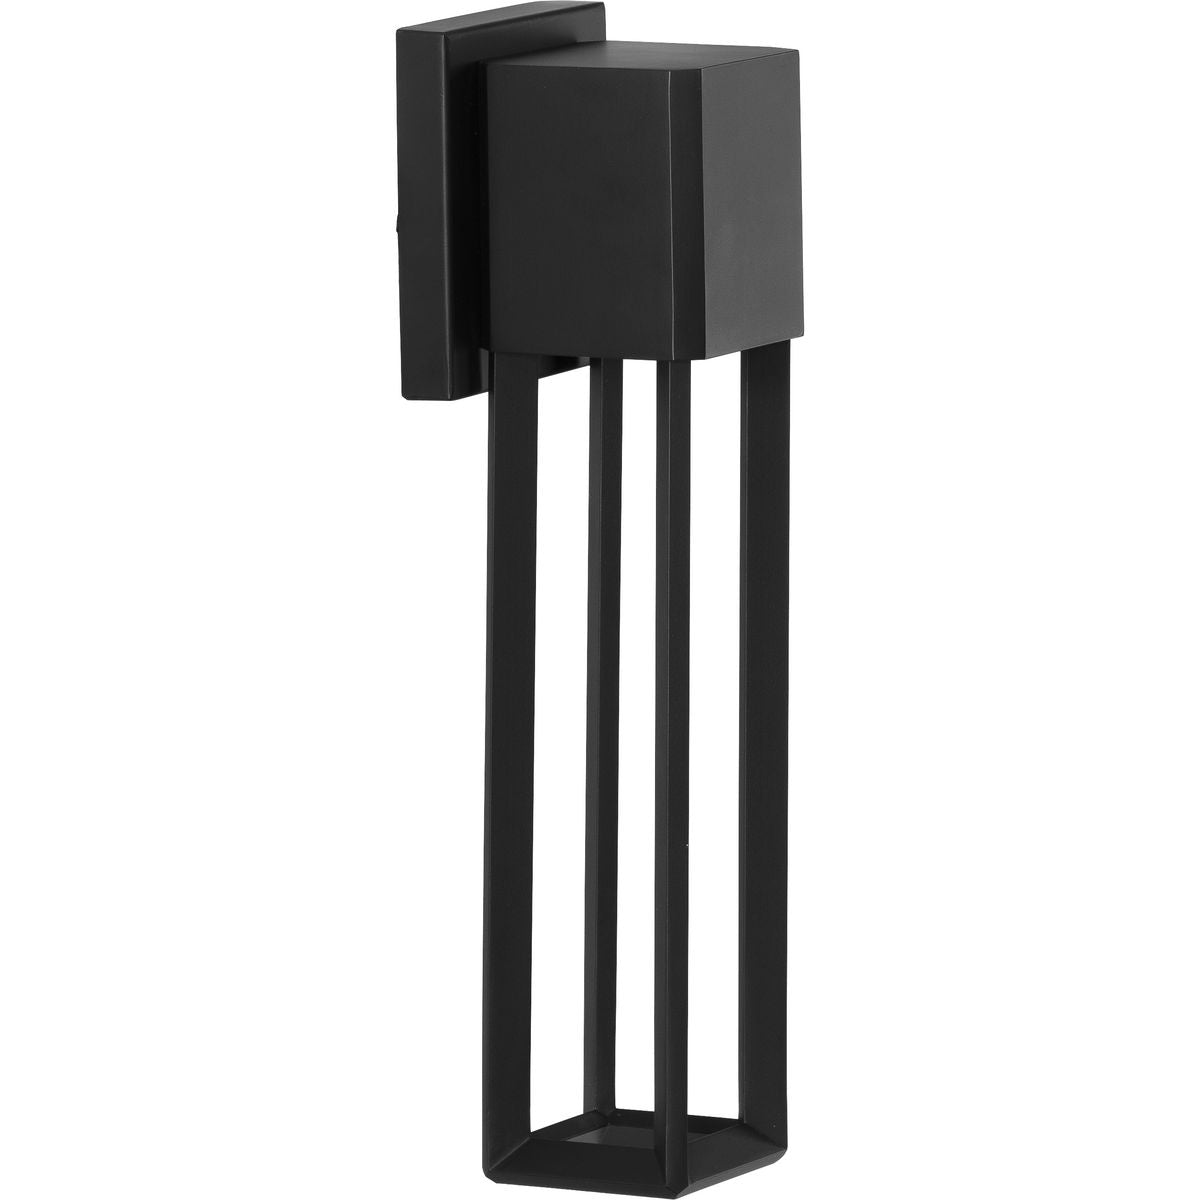 Z-1090 LED Outdoor Wall Light